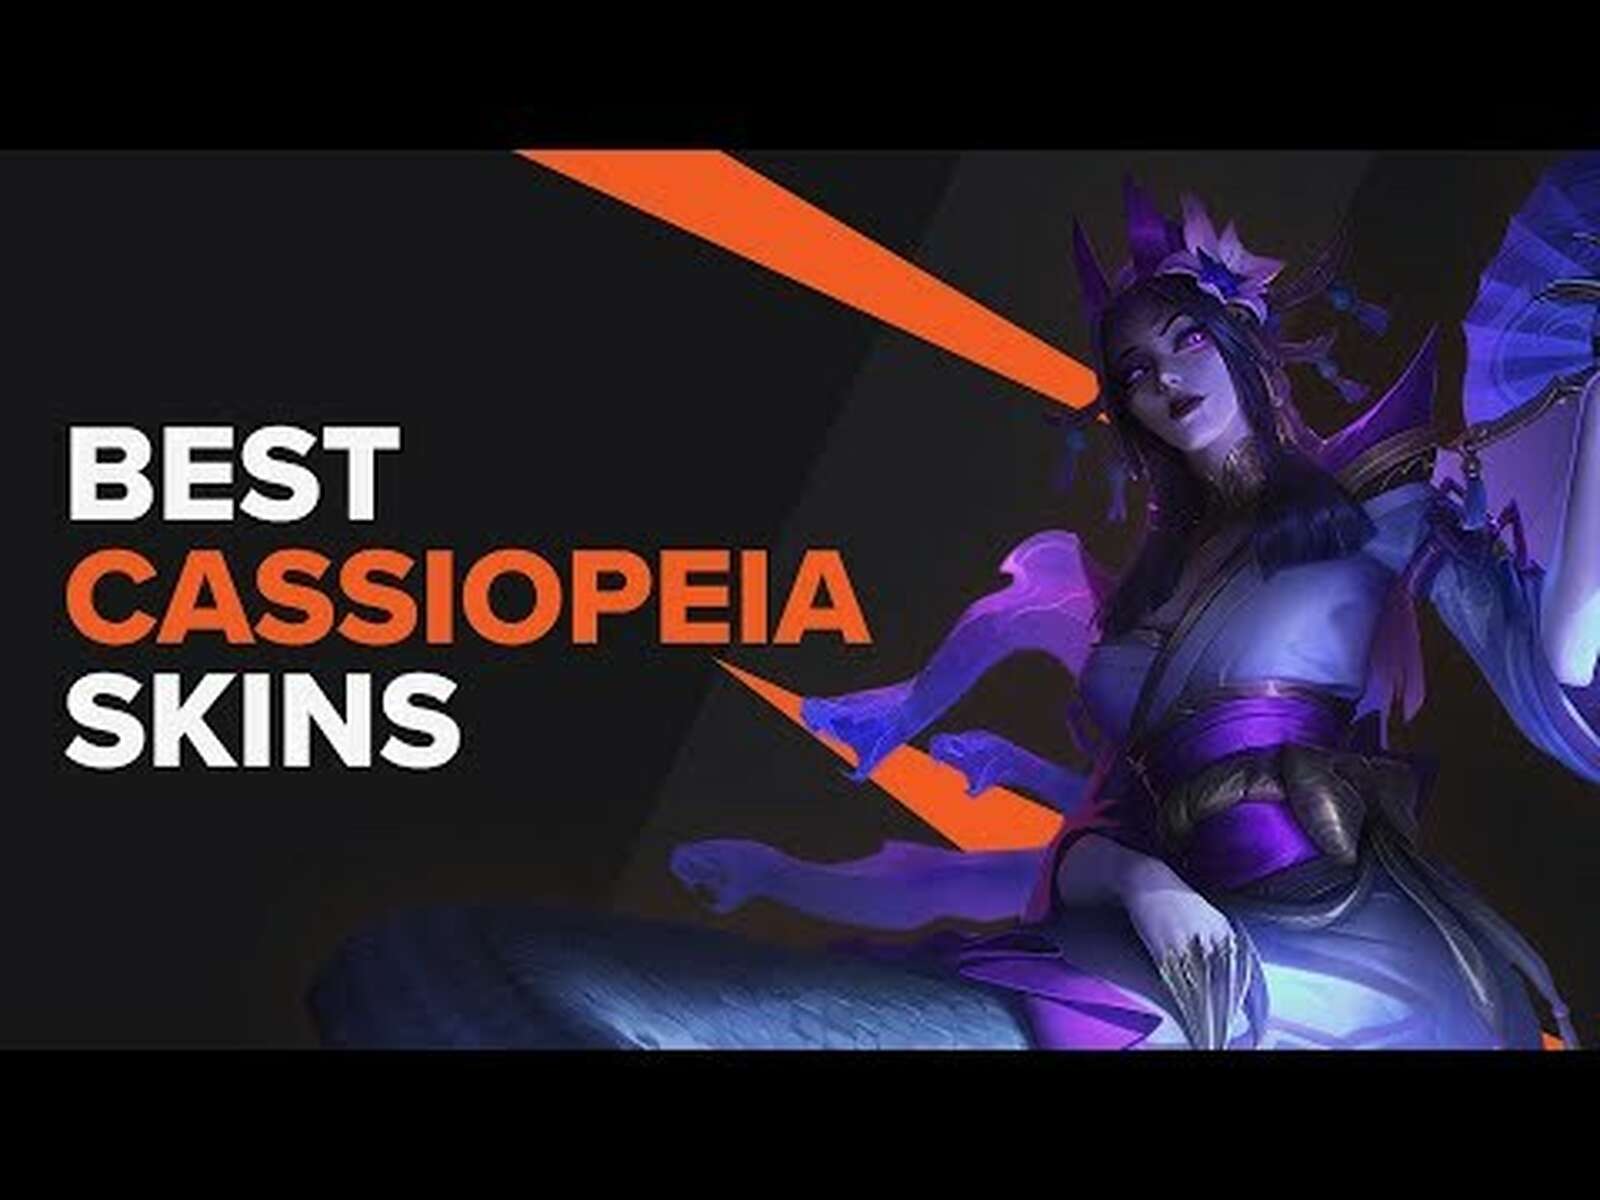 The Best Cbuttiopeia Skins in League of Legends